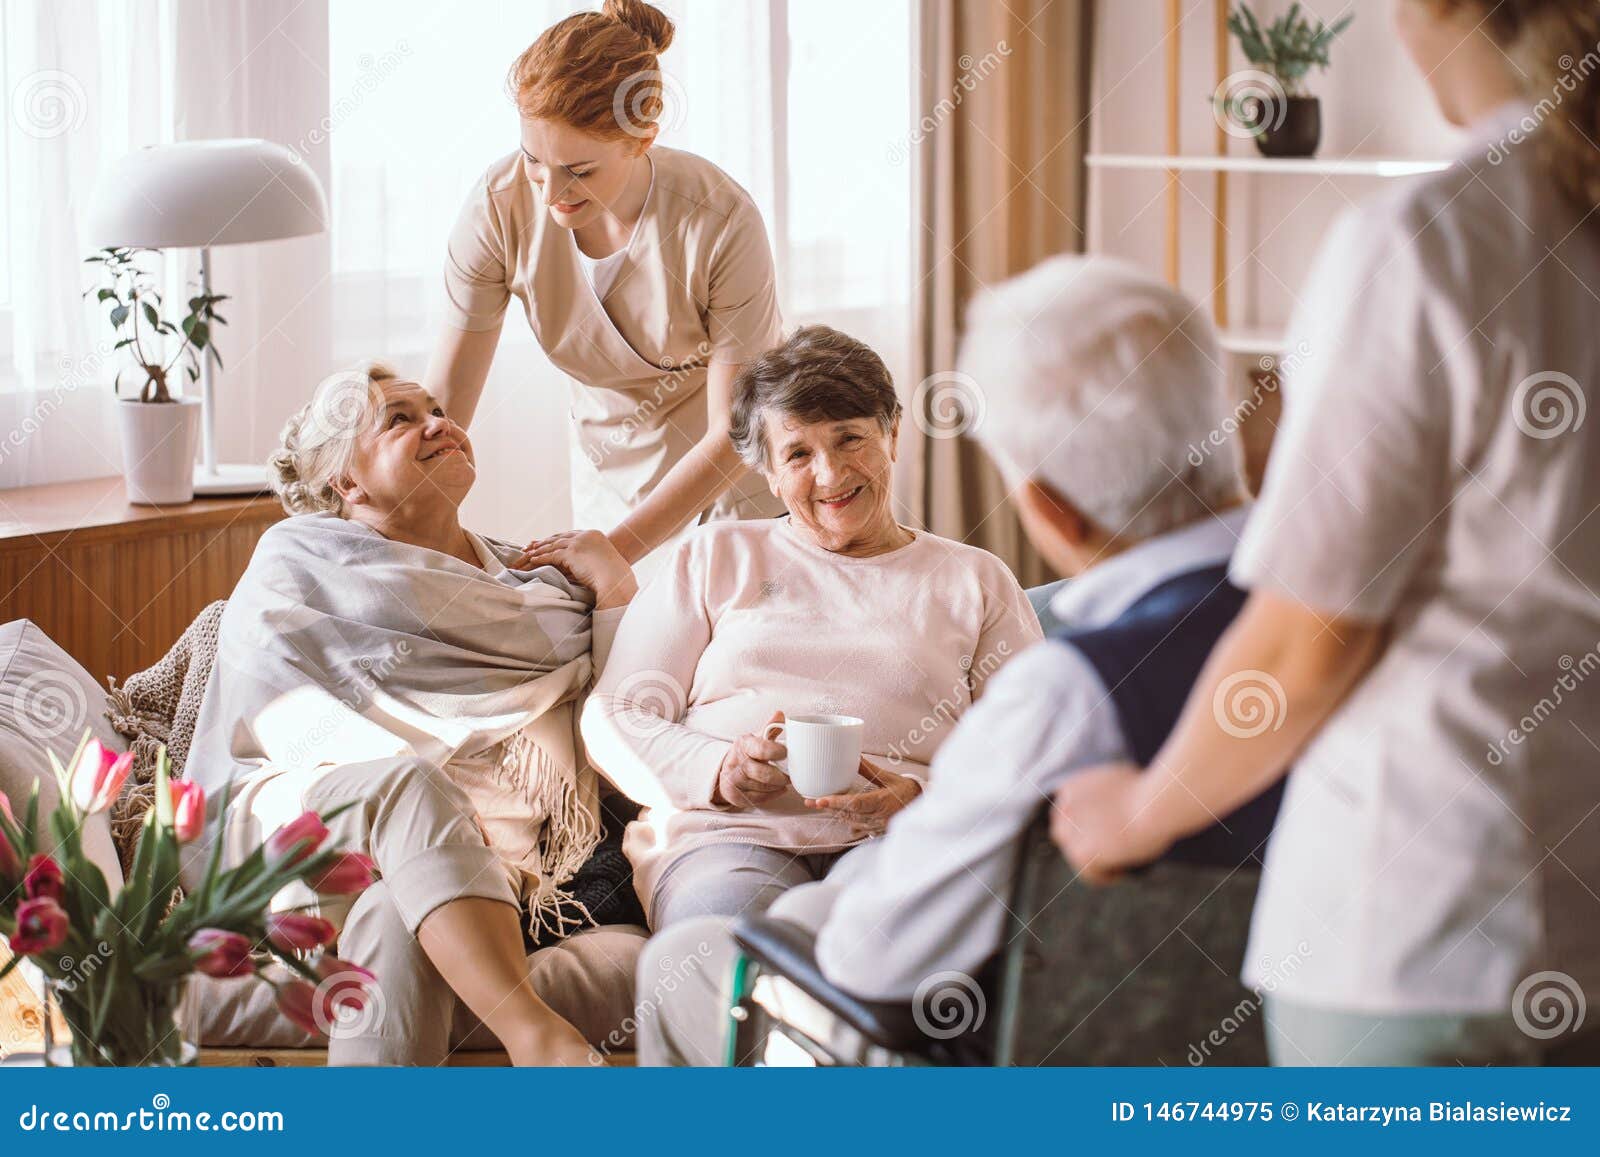 young caregiver comforting elderly woman in nursing home